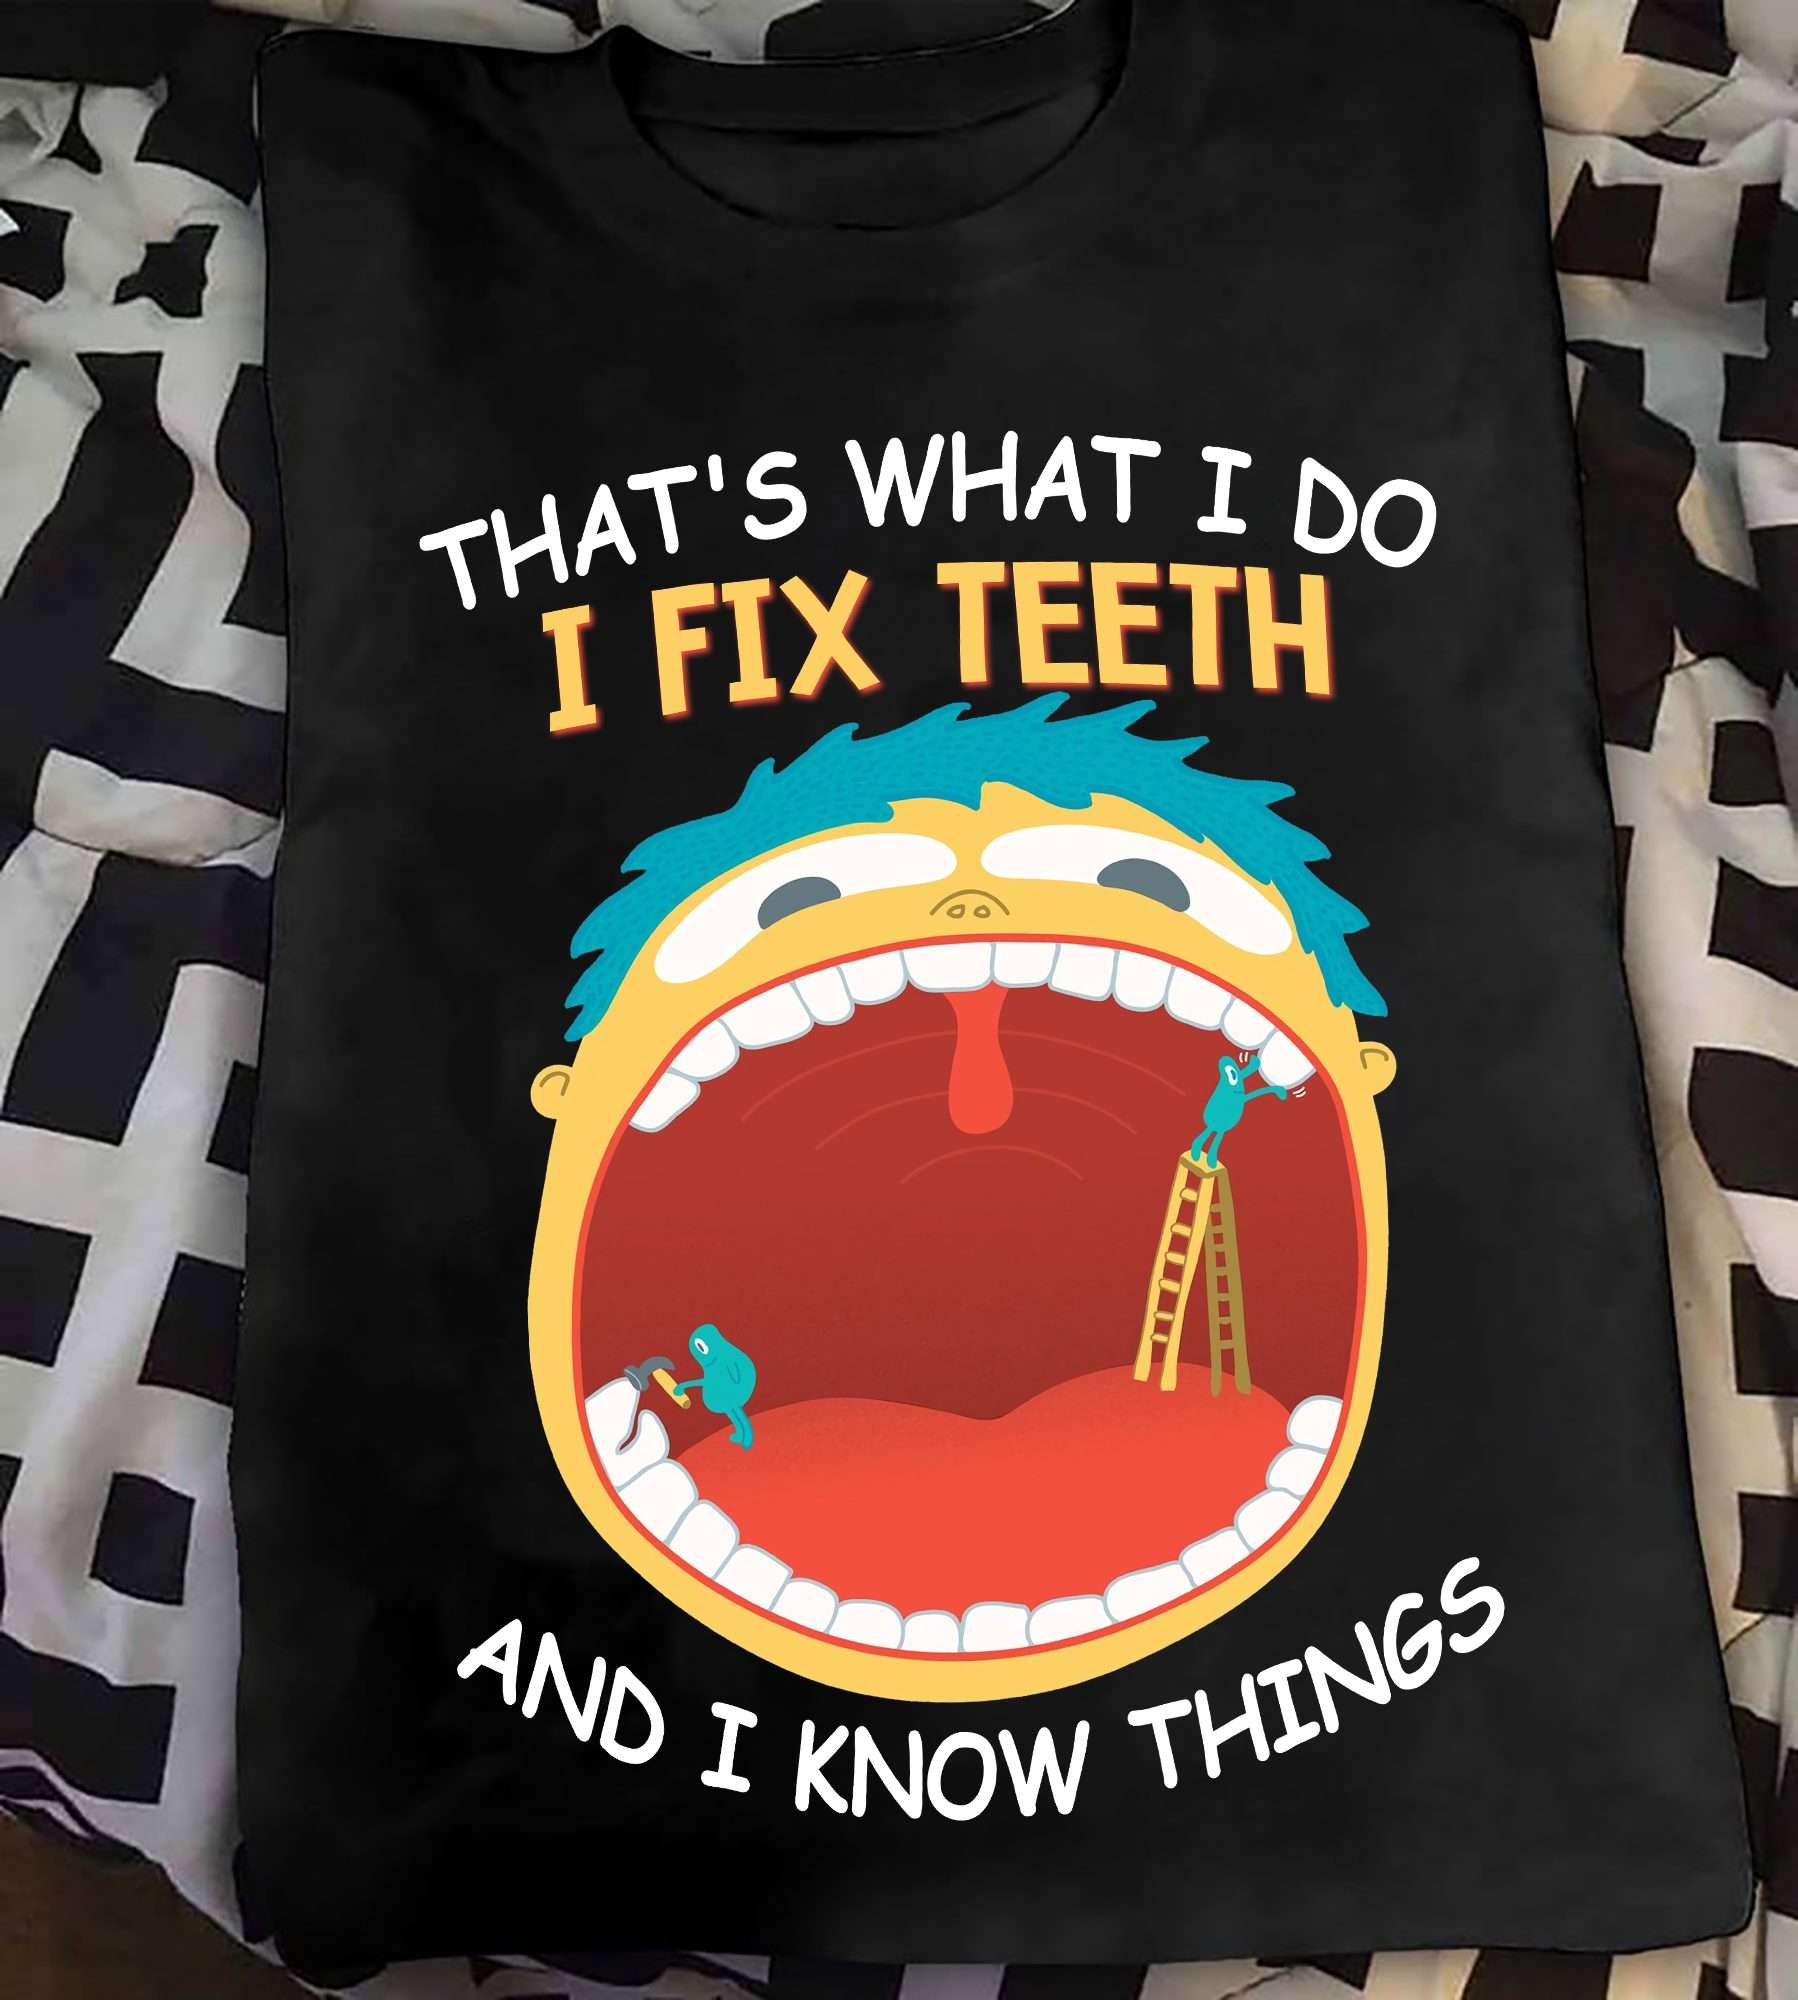 That's what I do I fix teeth and I know things - Dentist fix teeth, dentist the job